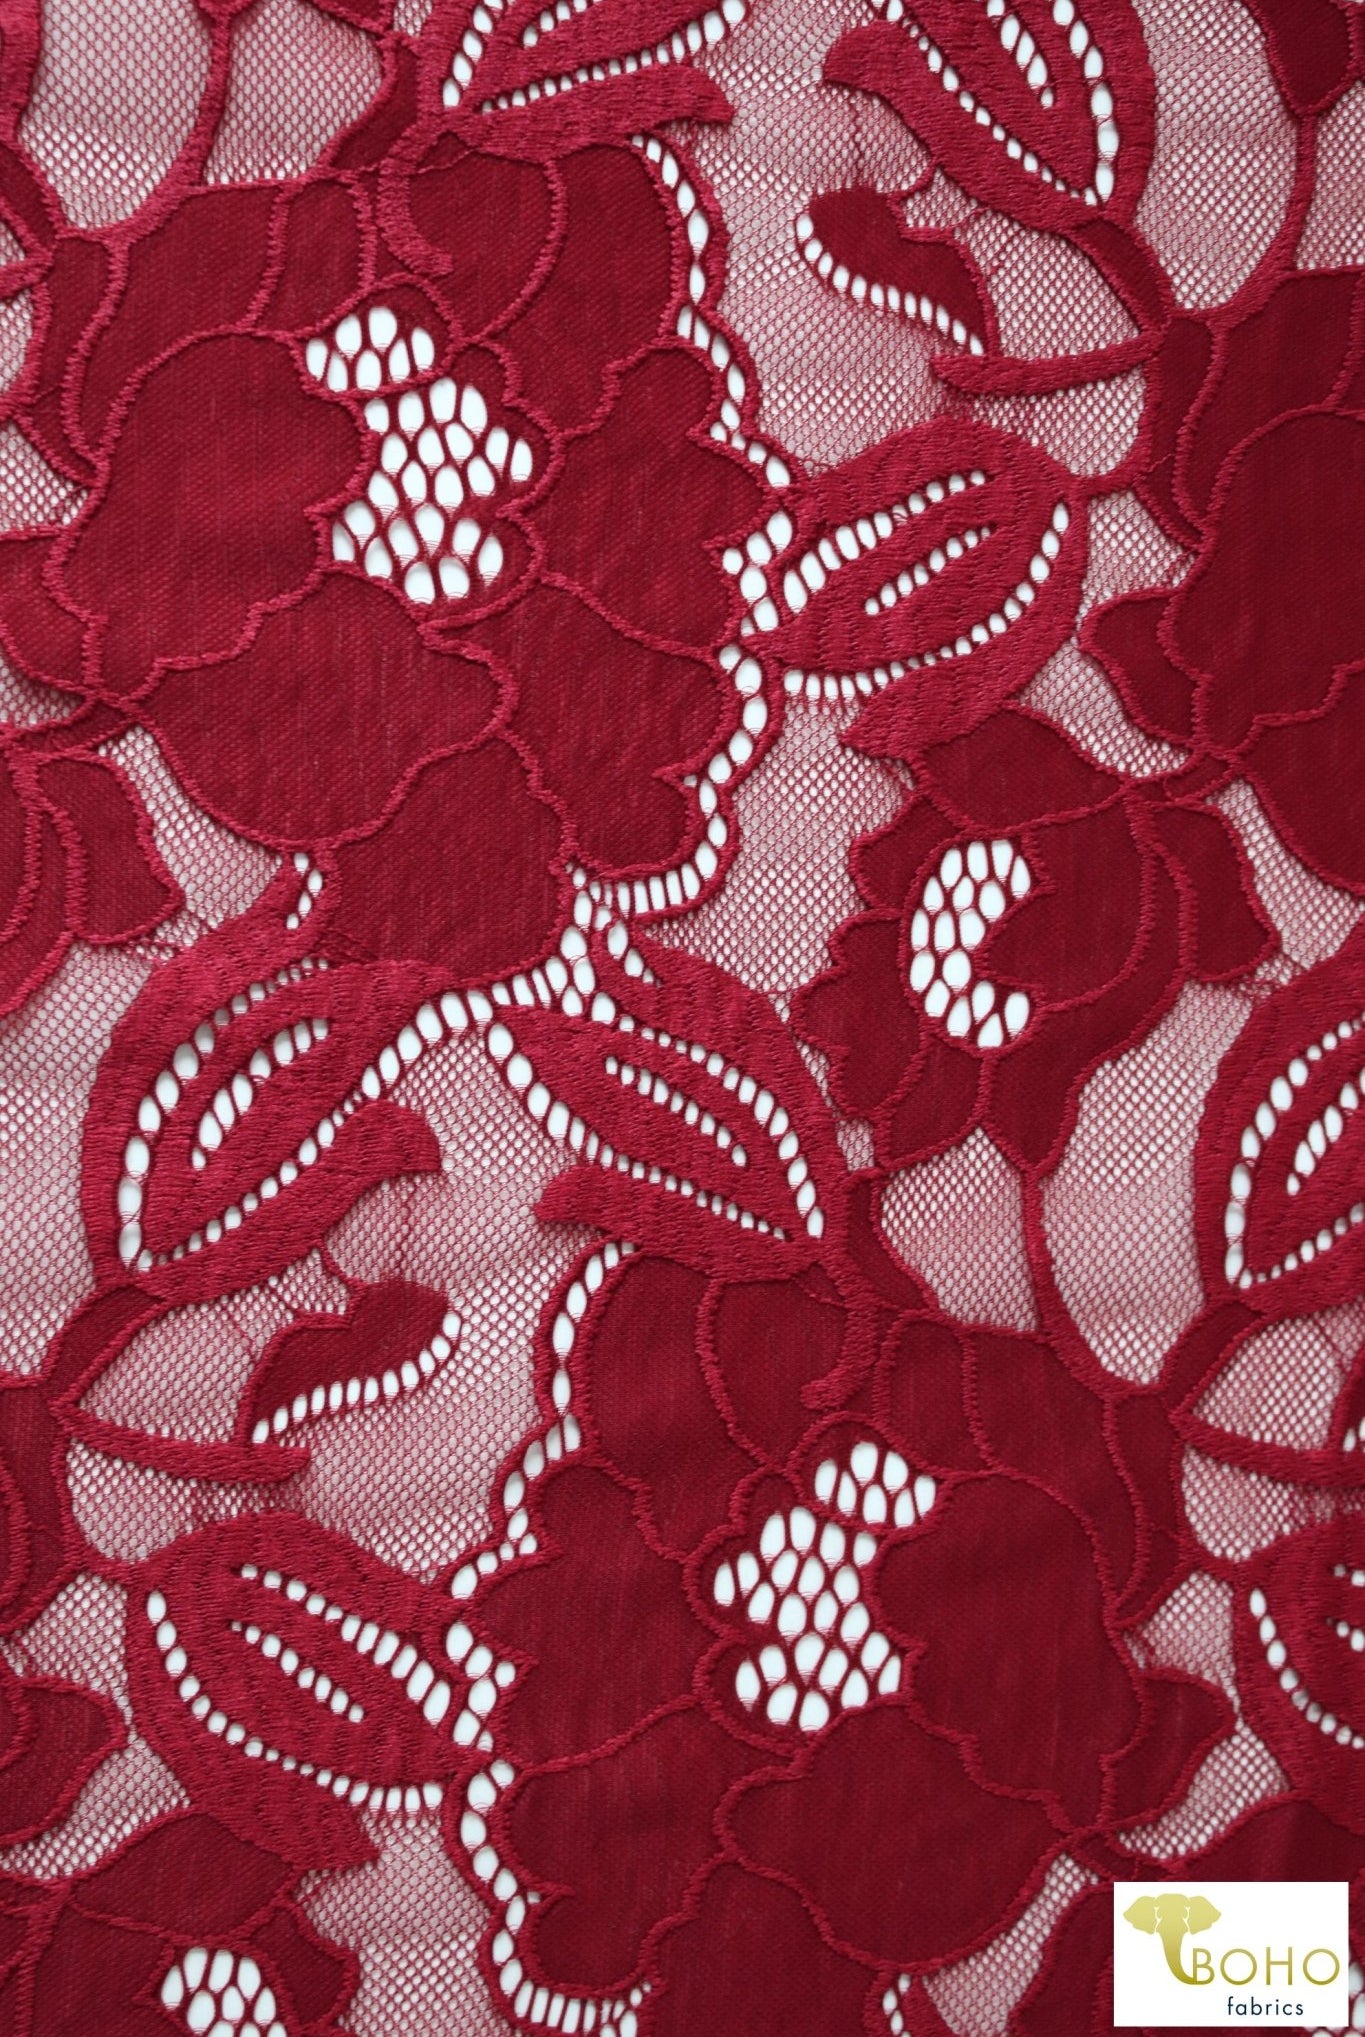 Peony Petals in Red. Stretch Lace Fabric. SL-127-RED - Boho Fabrics